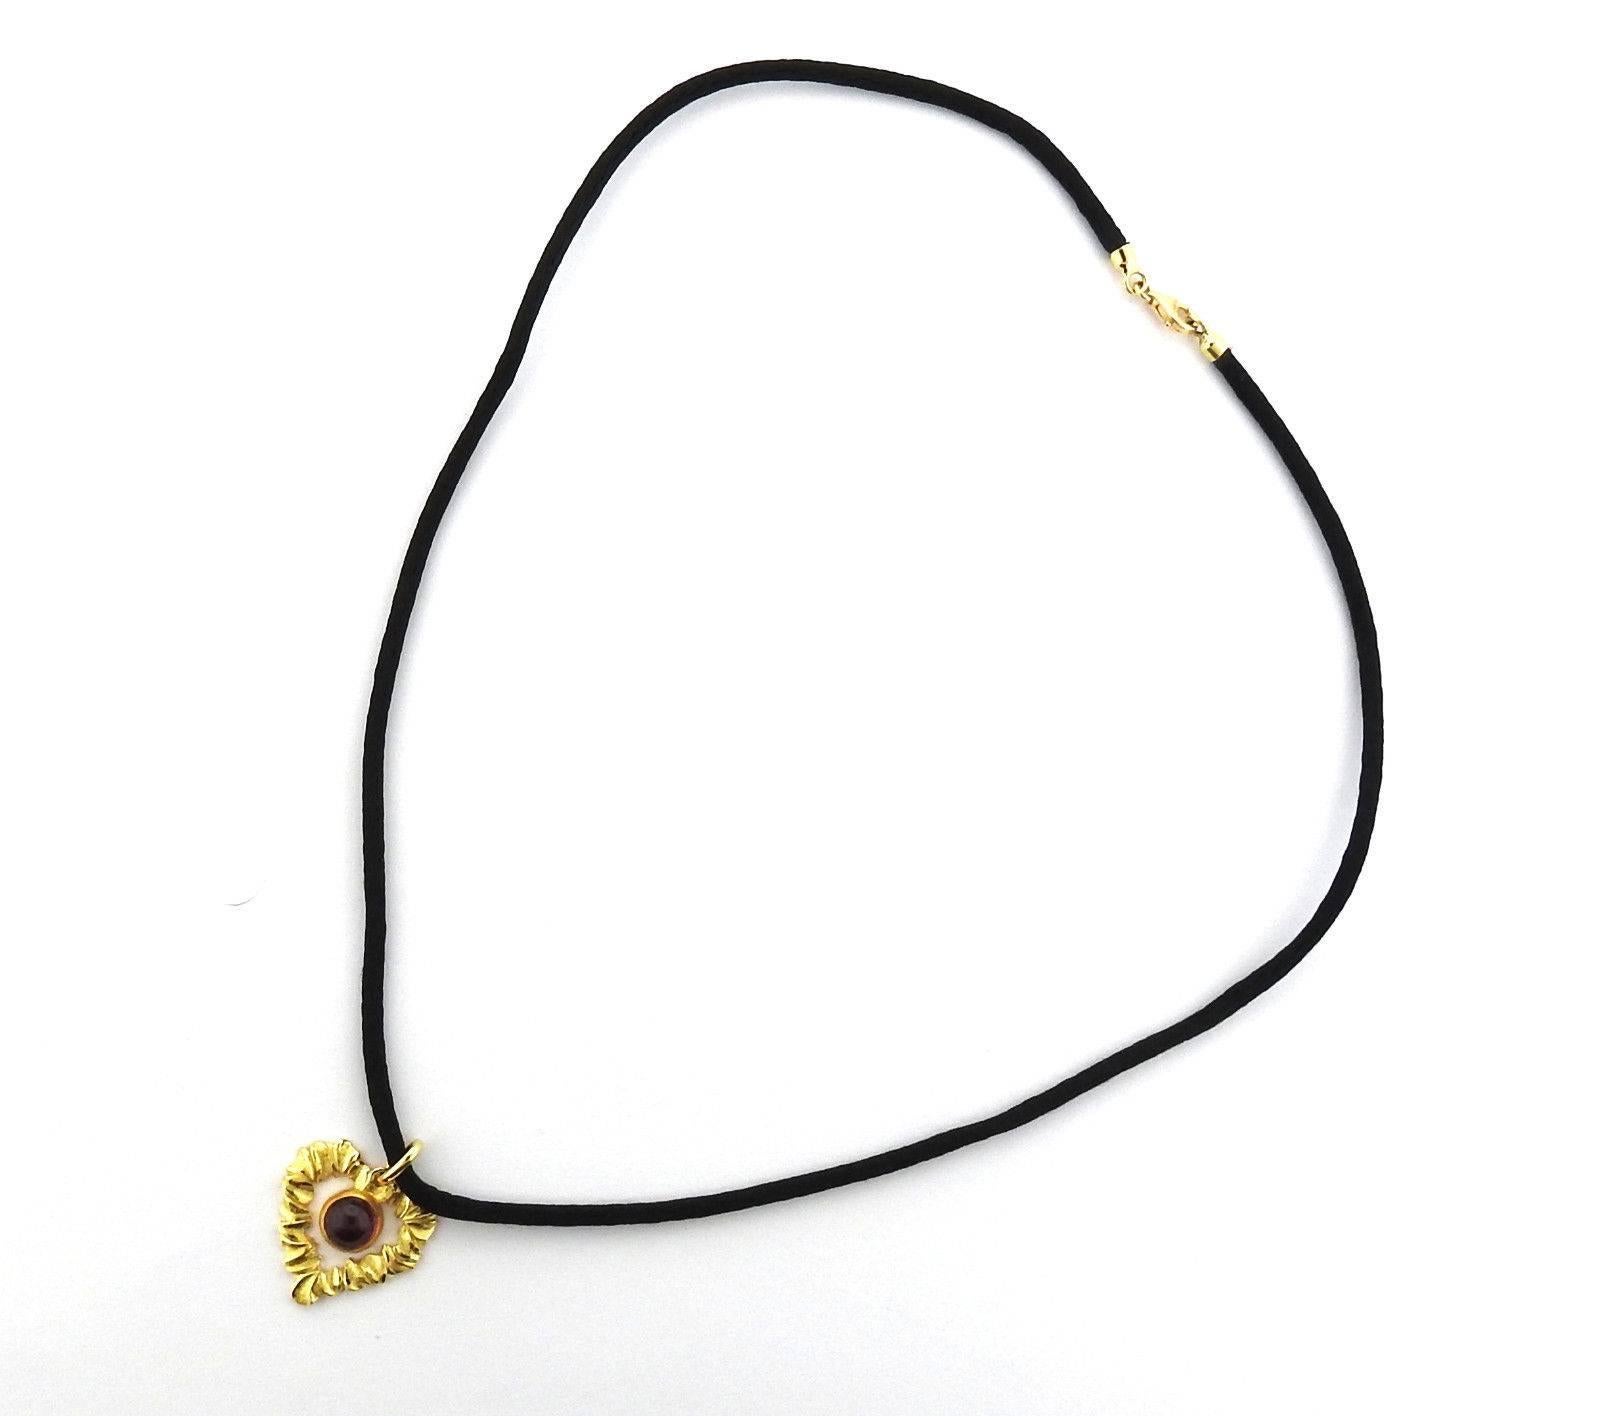 An 18k yellow gold heart pendant set with a 2.10ct rubbellite cabochon, suspended on a black cord.  The necklace is 17 5/8